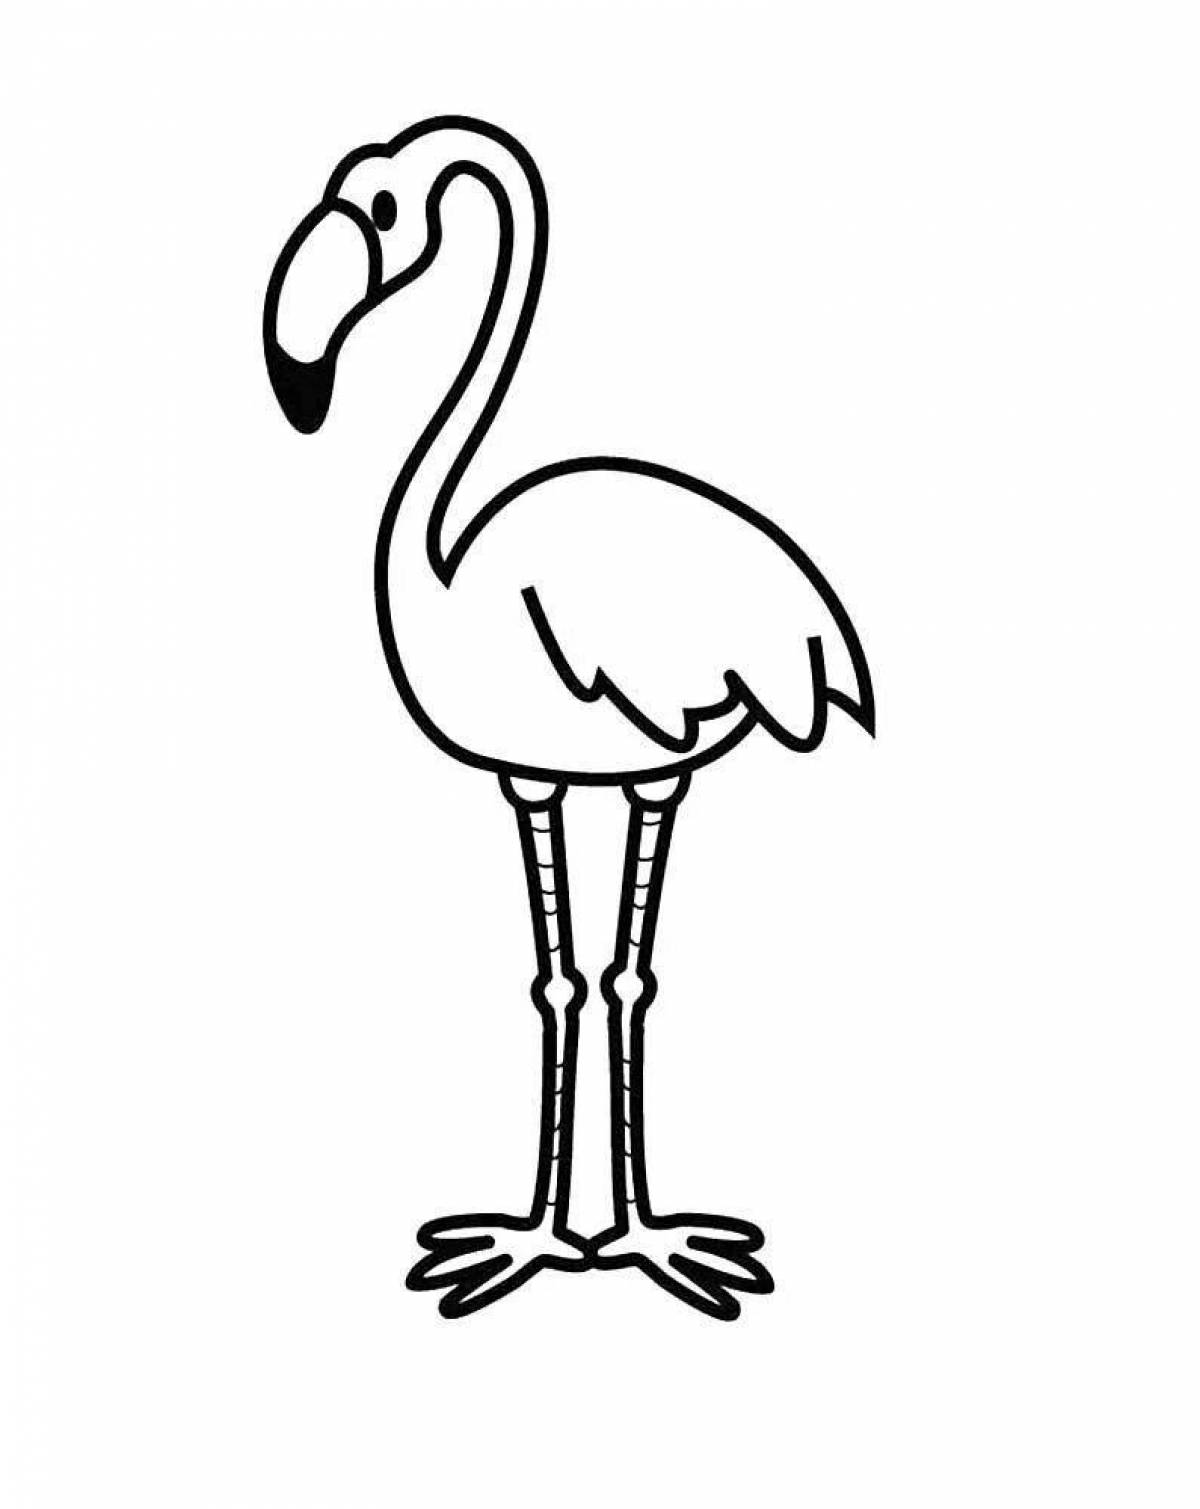 Playful ibis paint coloring page